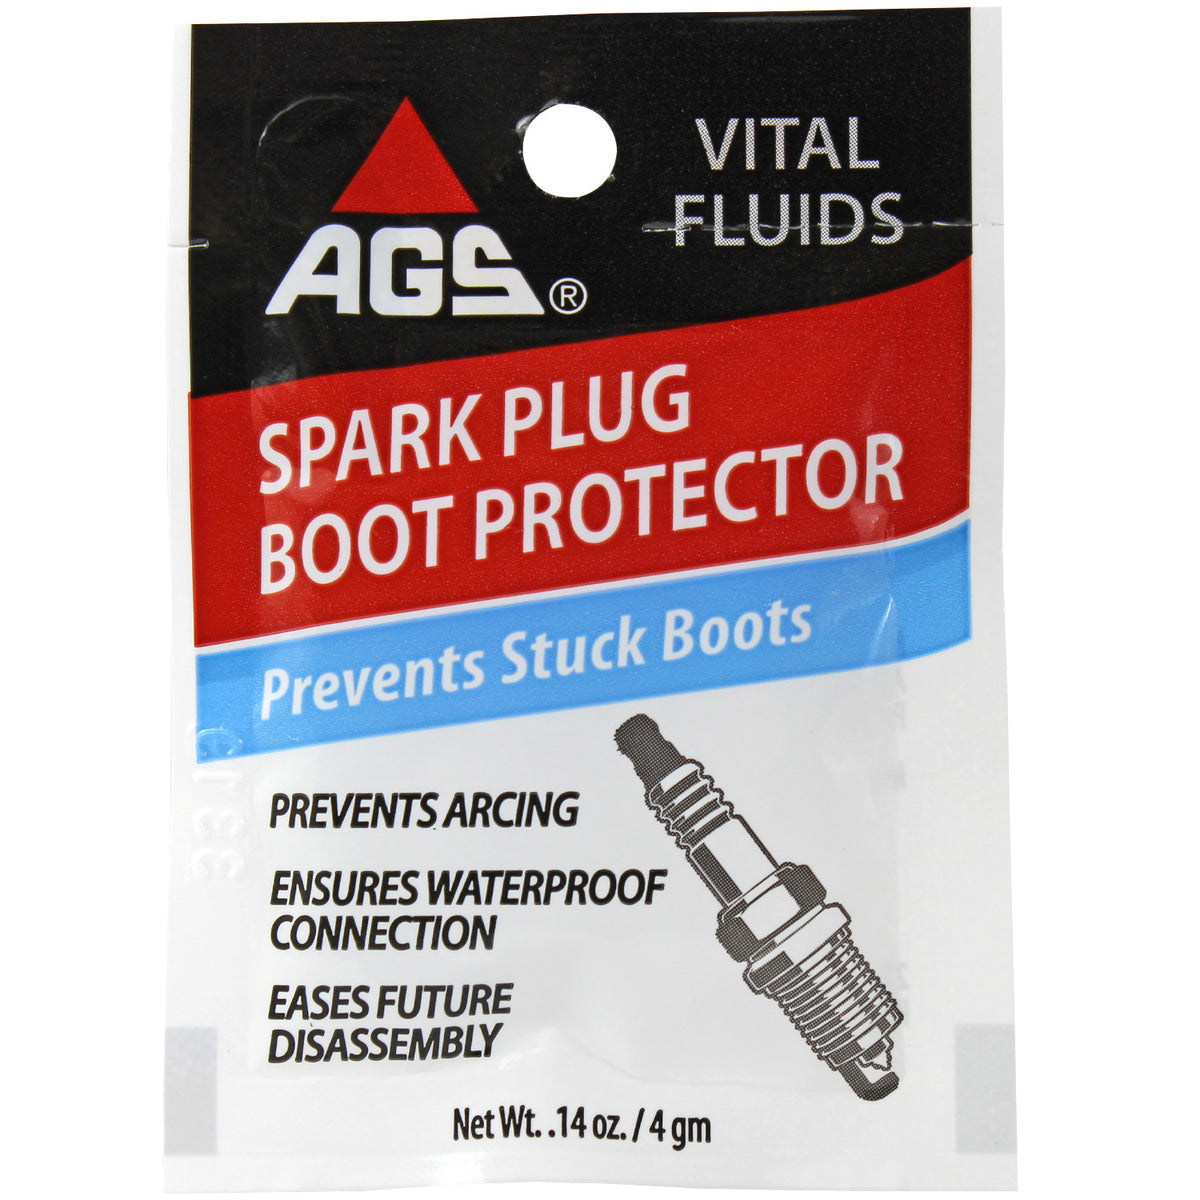 Spark Plug Boot Protector Dielectric Grease – AGS Company